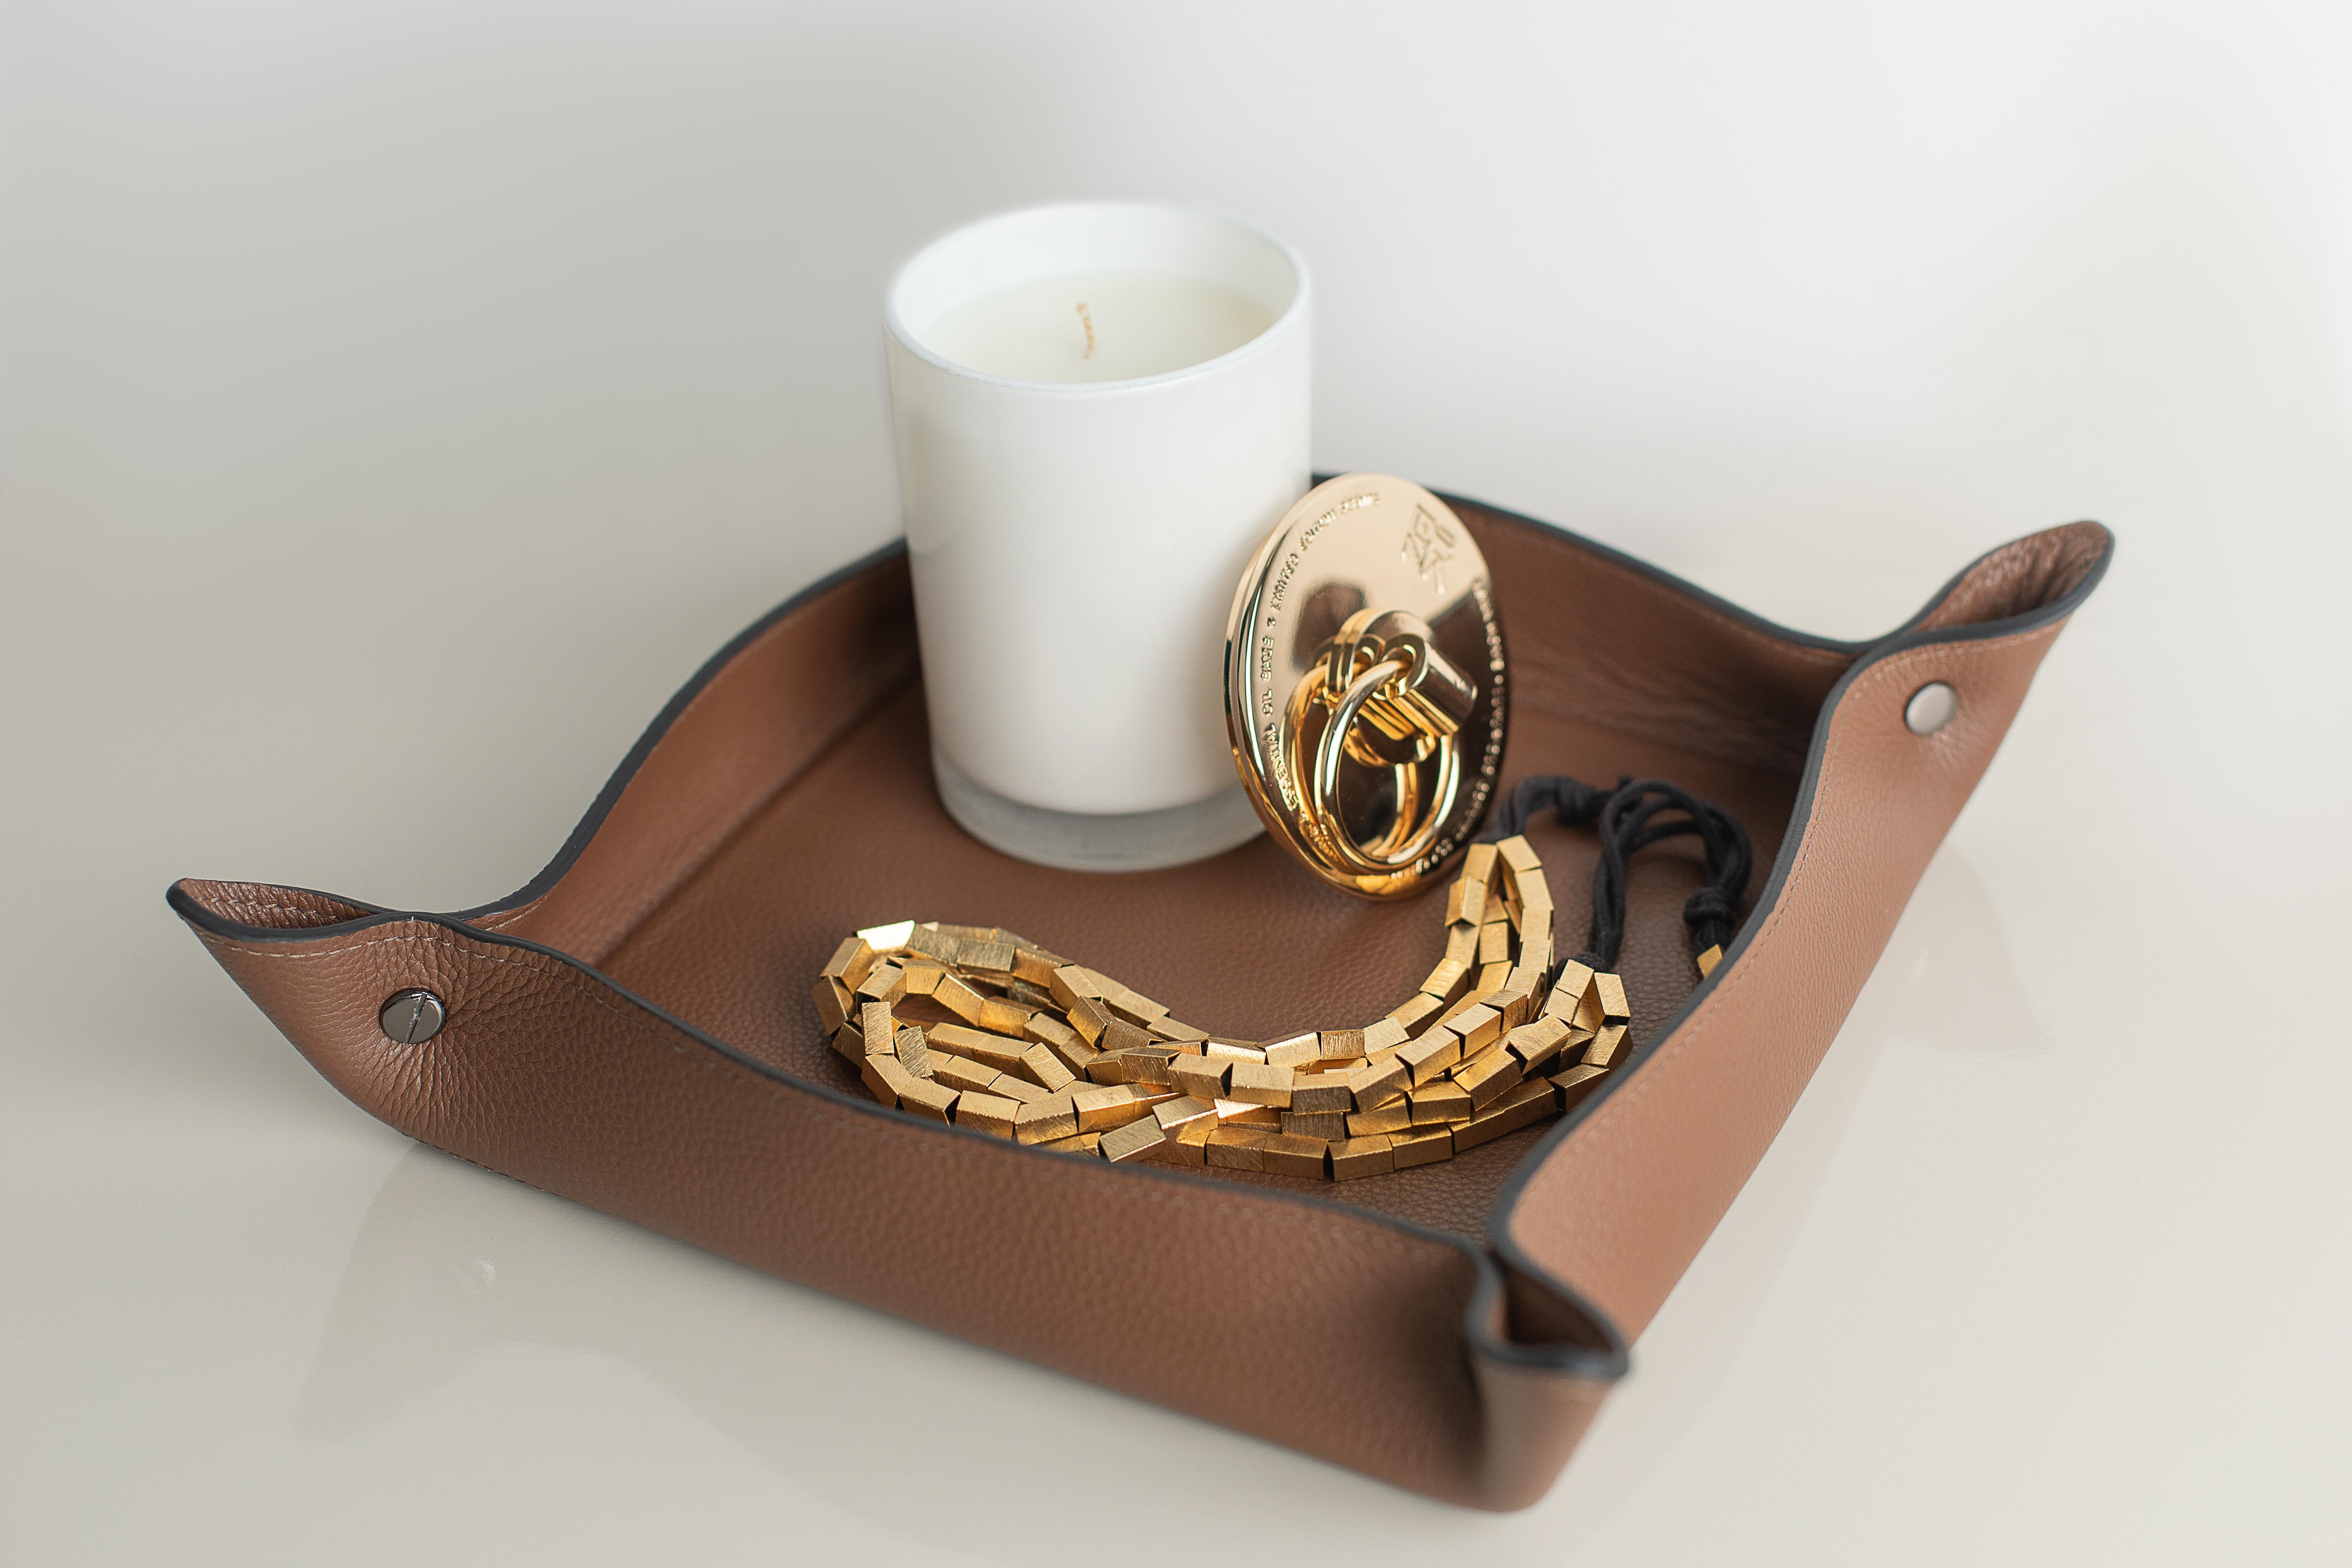 OBJECT HOLDER

The Trinket Tray/Object Holder Line can be used as organizers for everyday objects or as your imagination suggests.

Made of genuine leather, the Italian border finish and the side chrome metal add a unique refinement to the